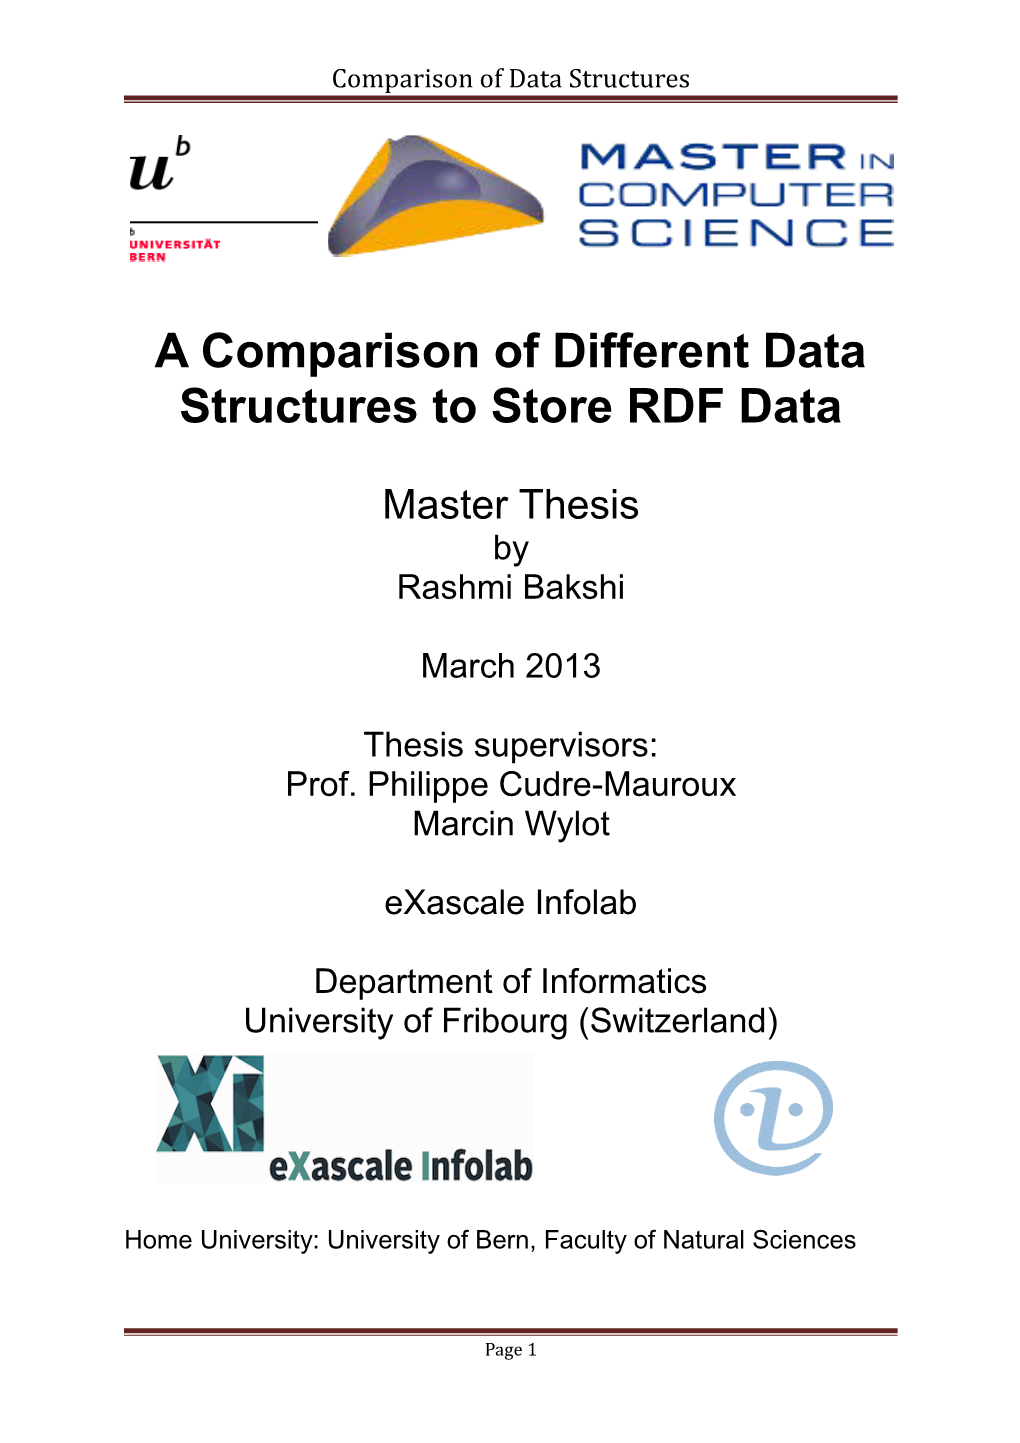 A Comparison of Different Data Structures to Store RDF Data